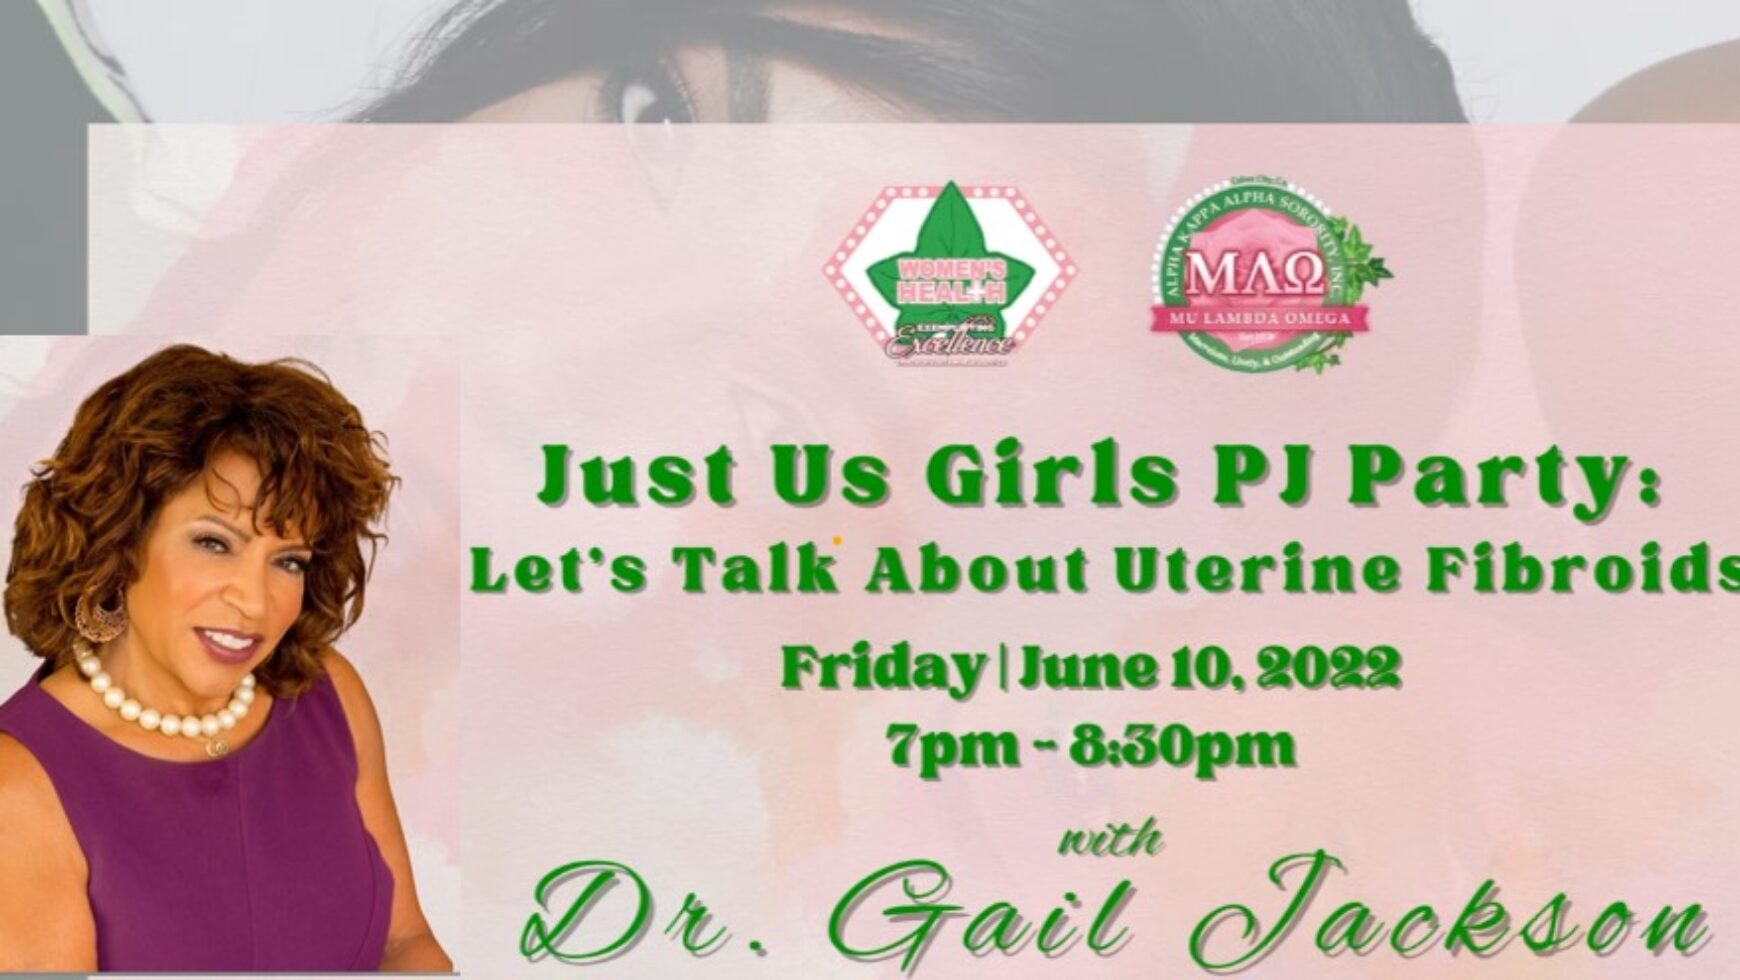 MLO Hosts Just Us Girls PJ Party: Let’s Talk About Uterine Fibroids